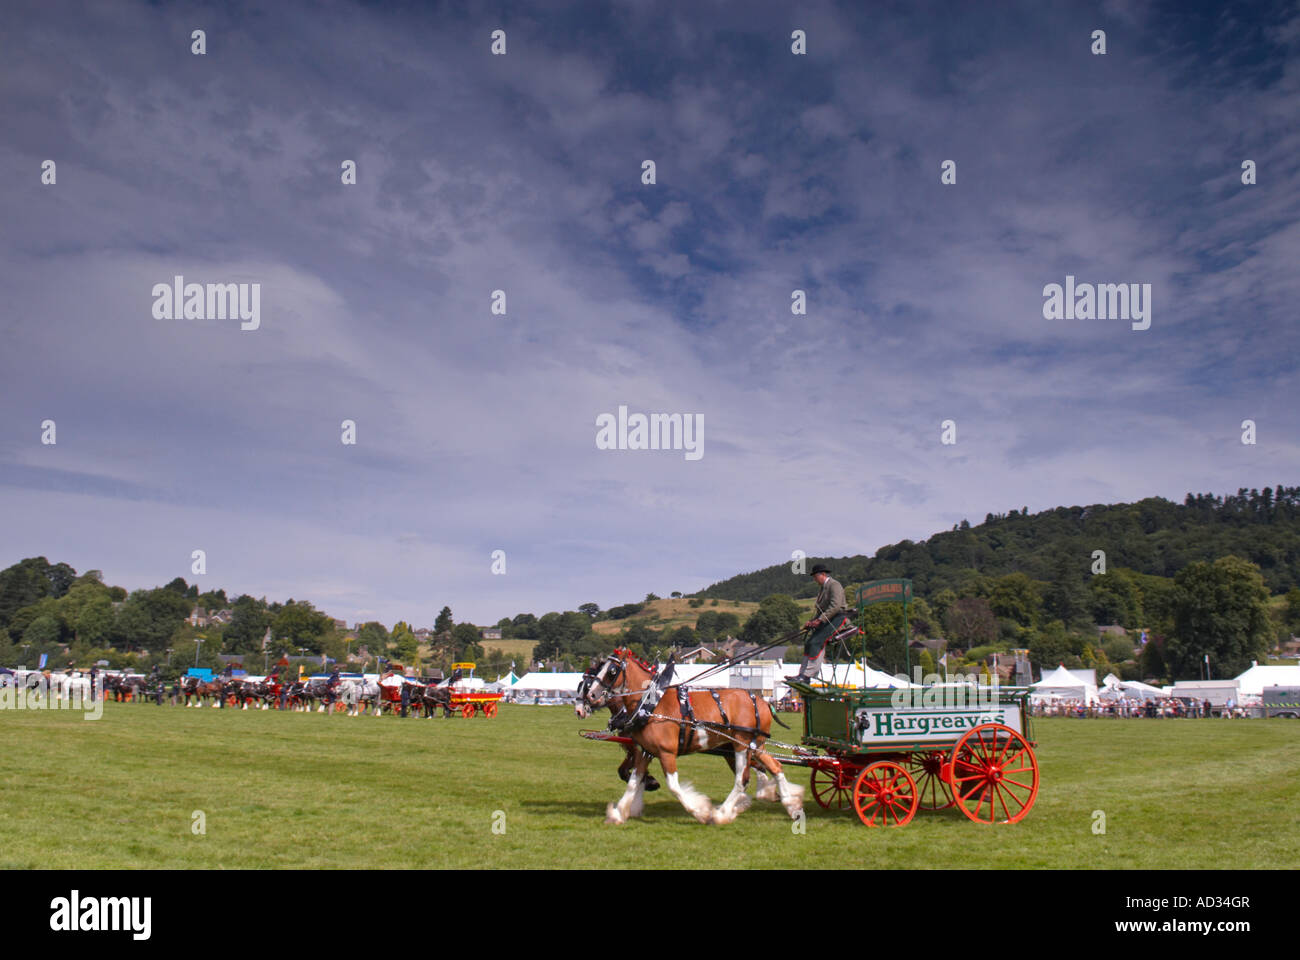 Drayhorses and dray at Bakewell show 2007 in Derbyshire 'Great Britain' Stock Photo